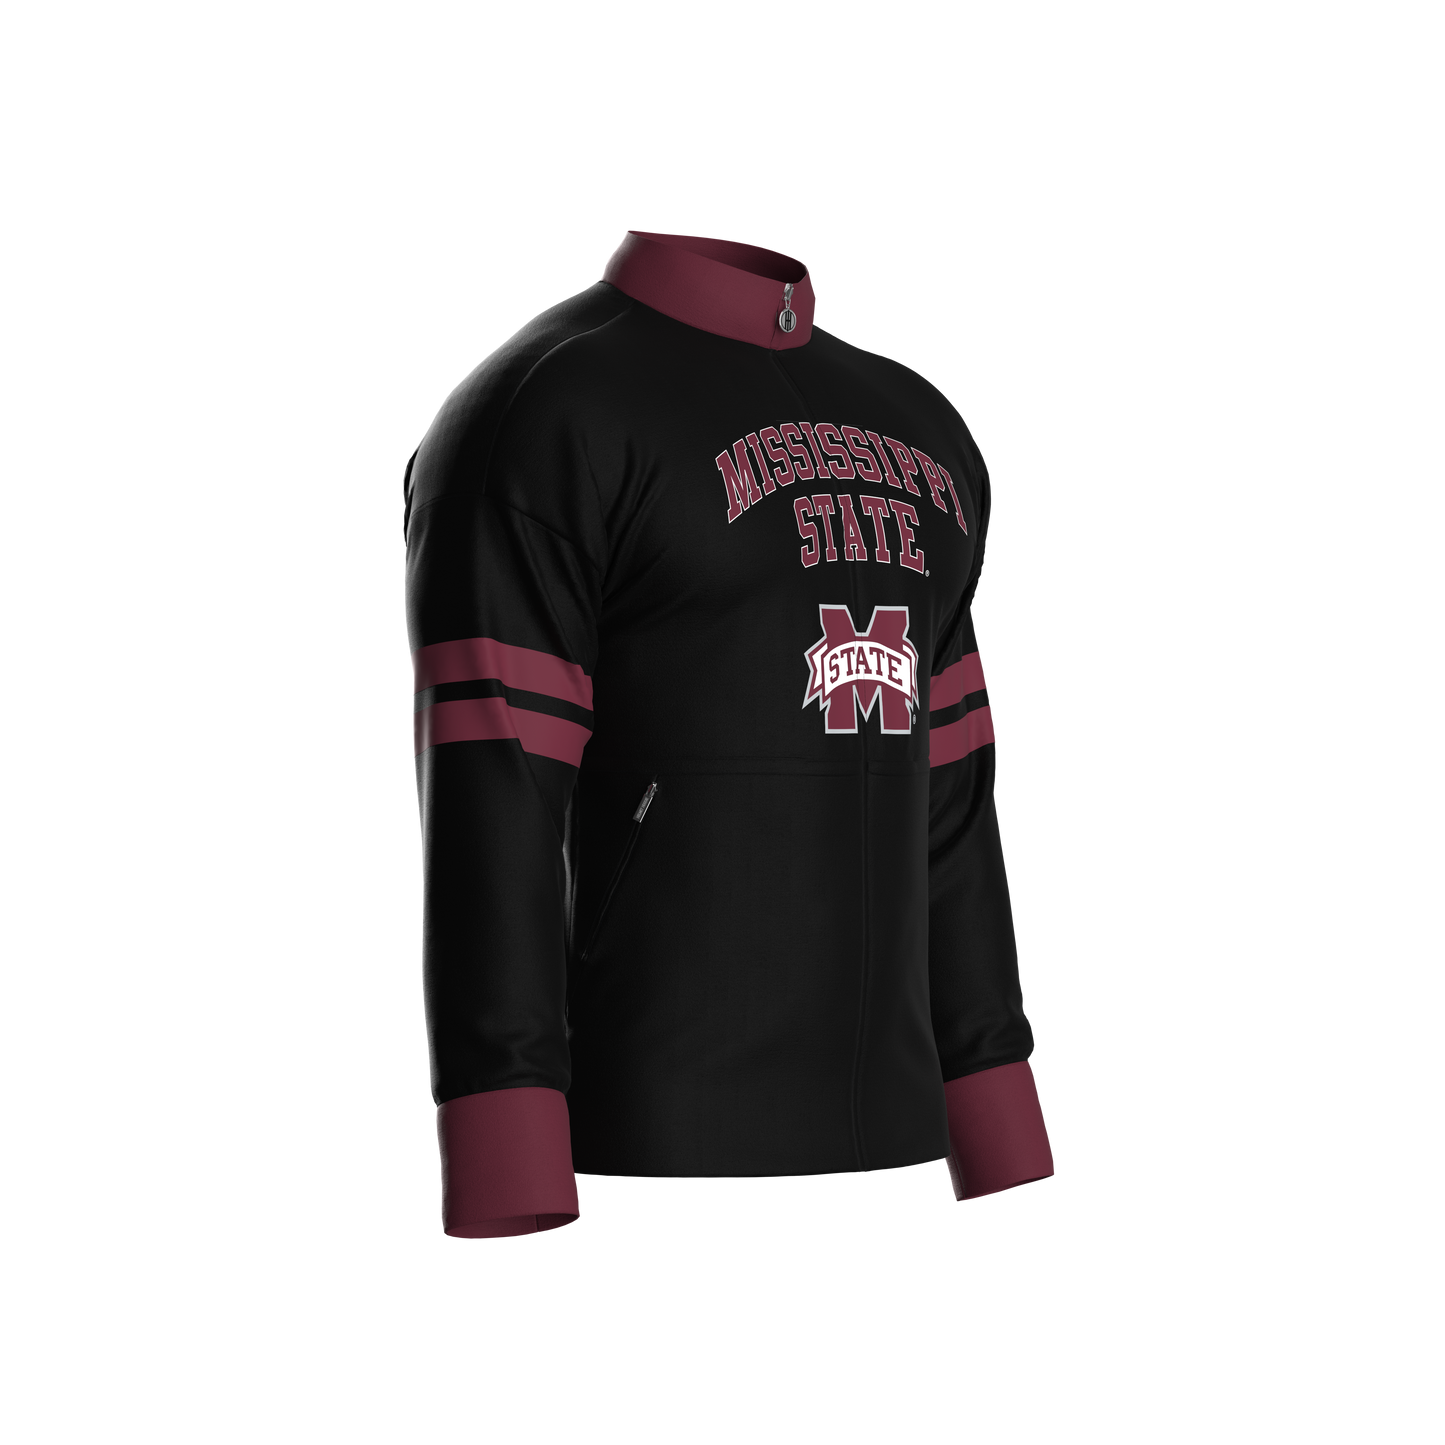 Mississippi State University Away Zip-Up (adult)